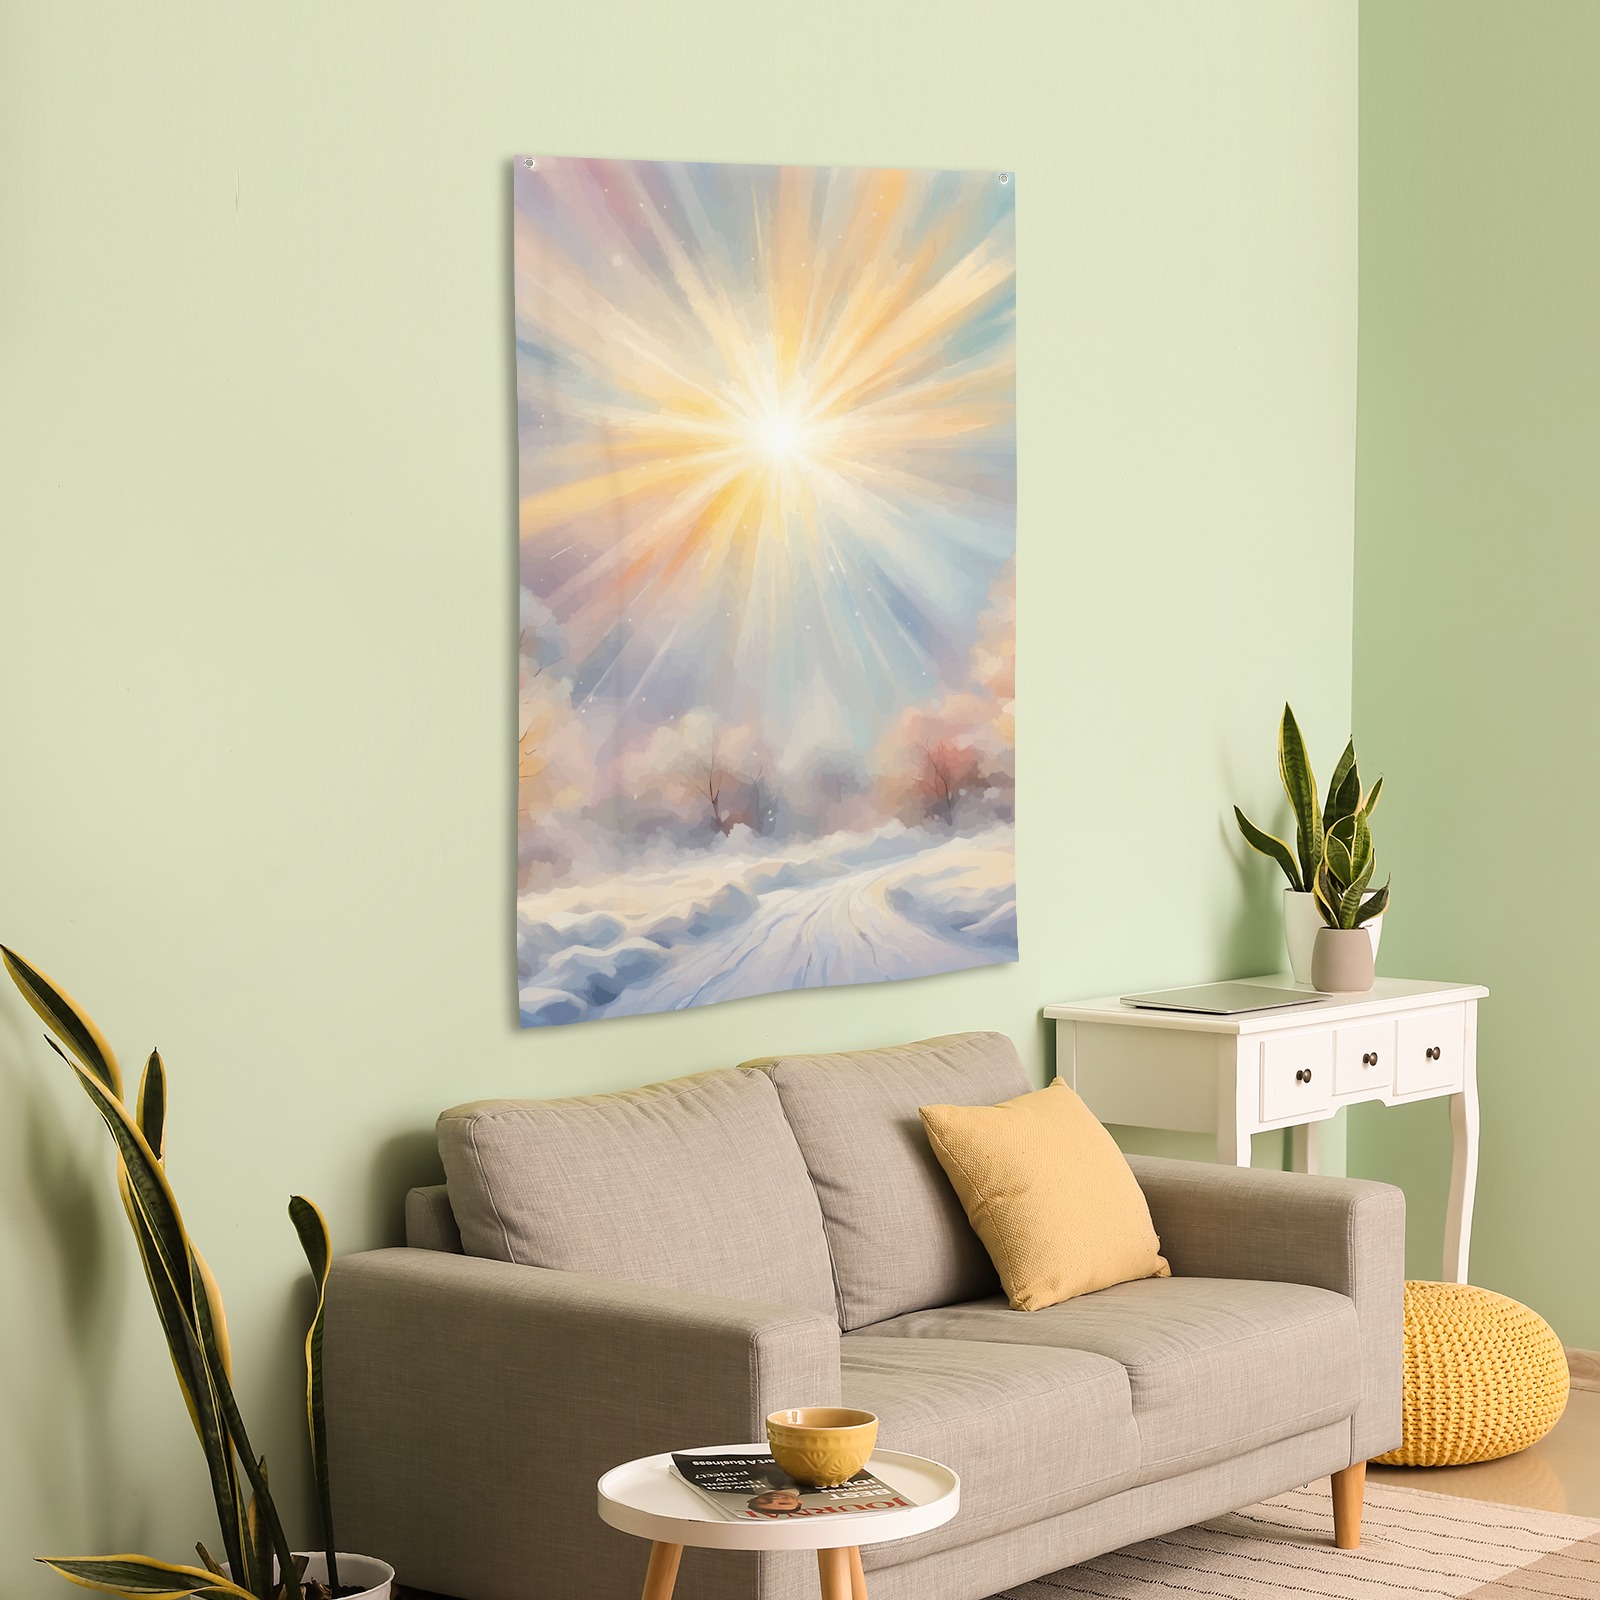 Magical sun is shining over the winter road art House Flag 34.5"x56"